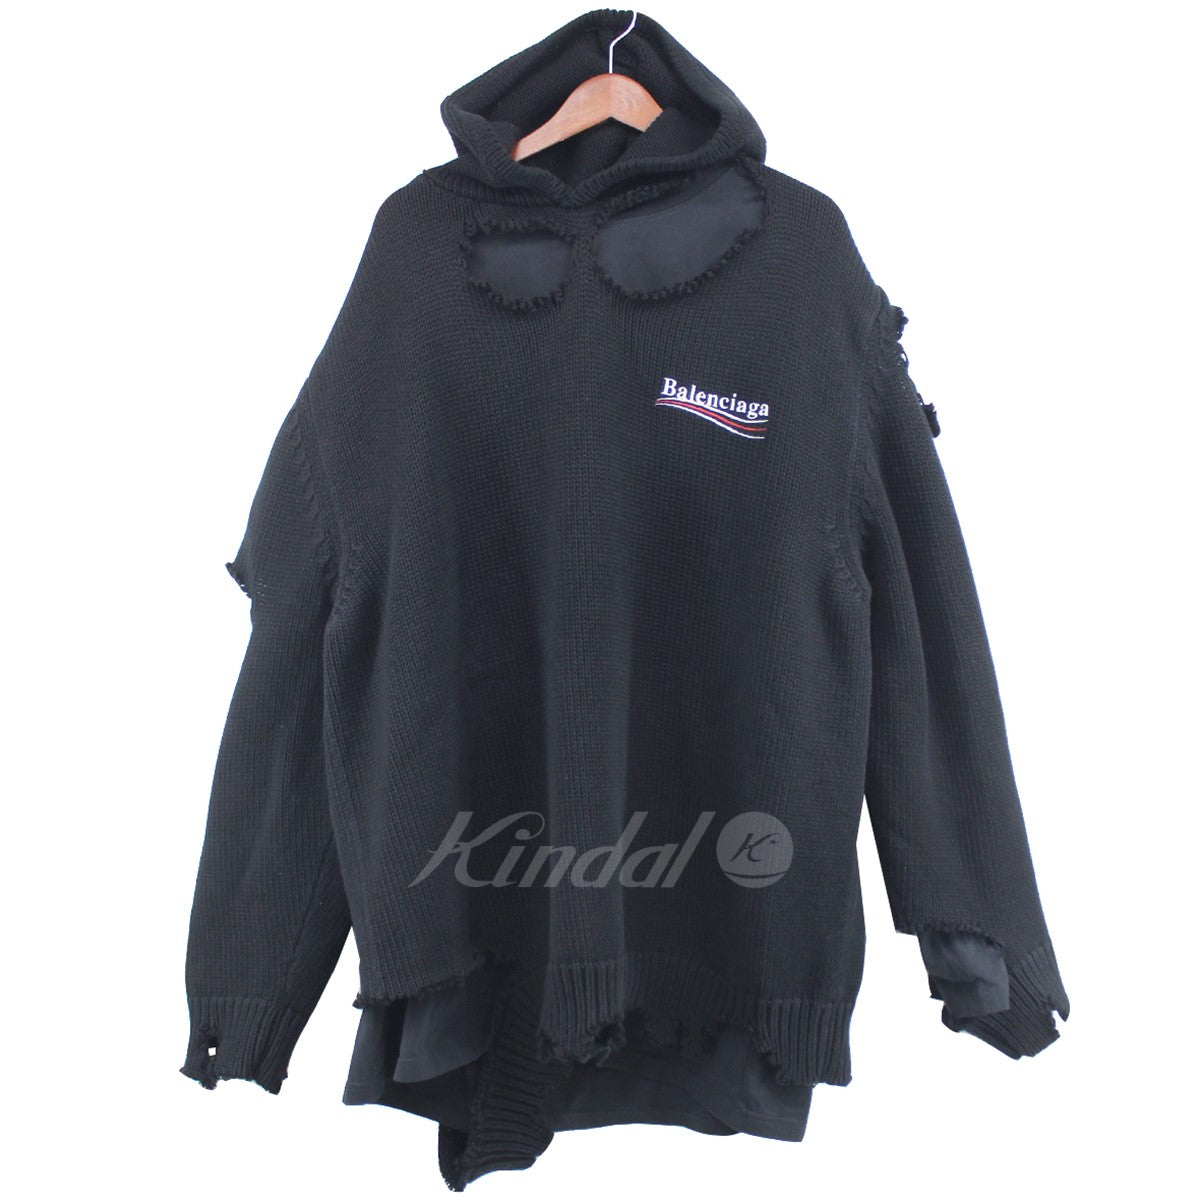 BALENCIAGA(バレンシアガ) 21AW Political Campaign Destroyed Hoodie デストロイパーカー